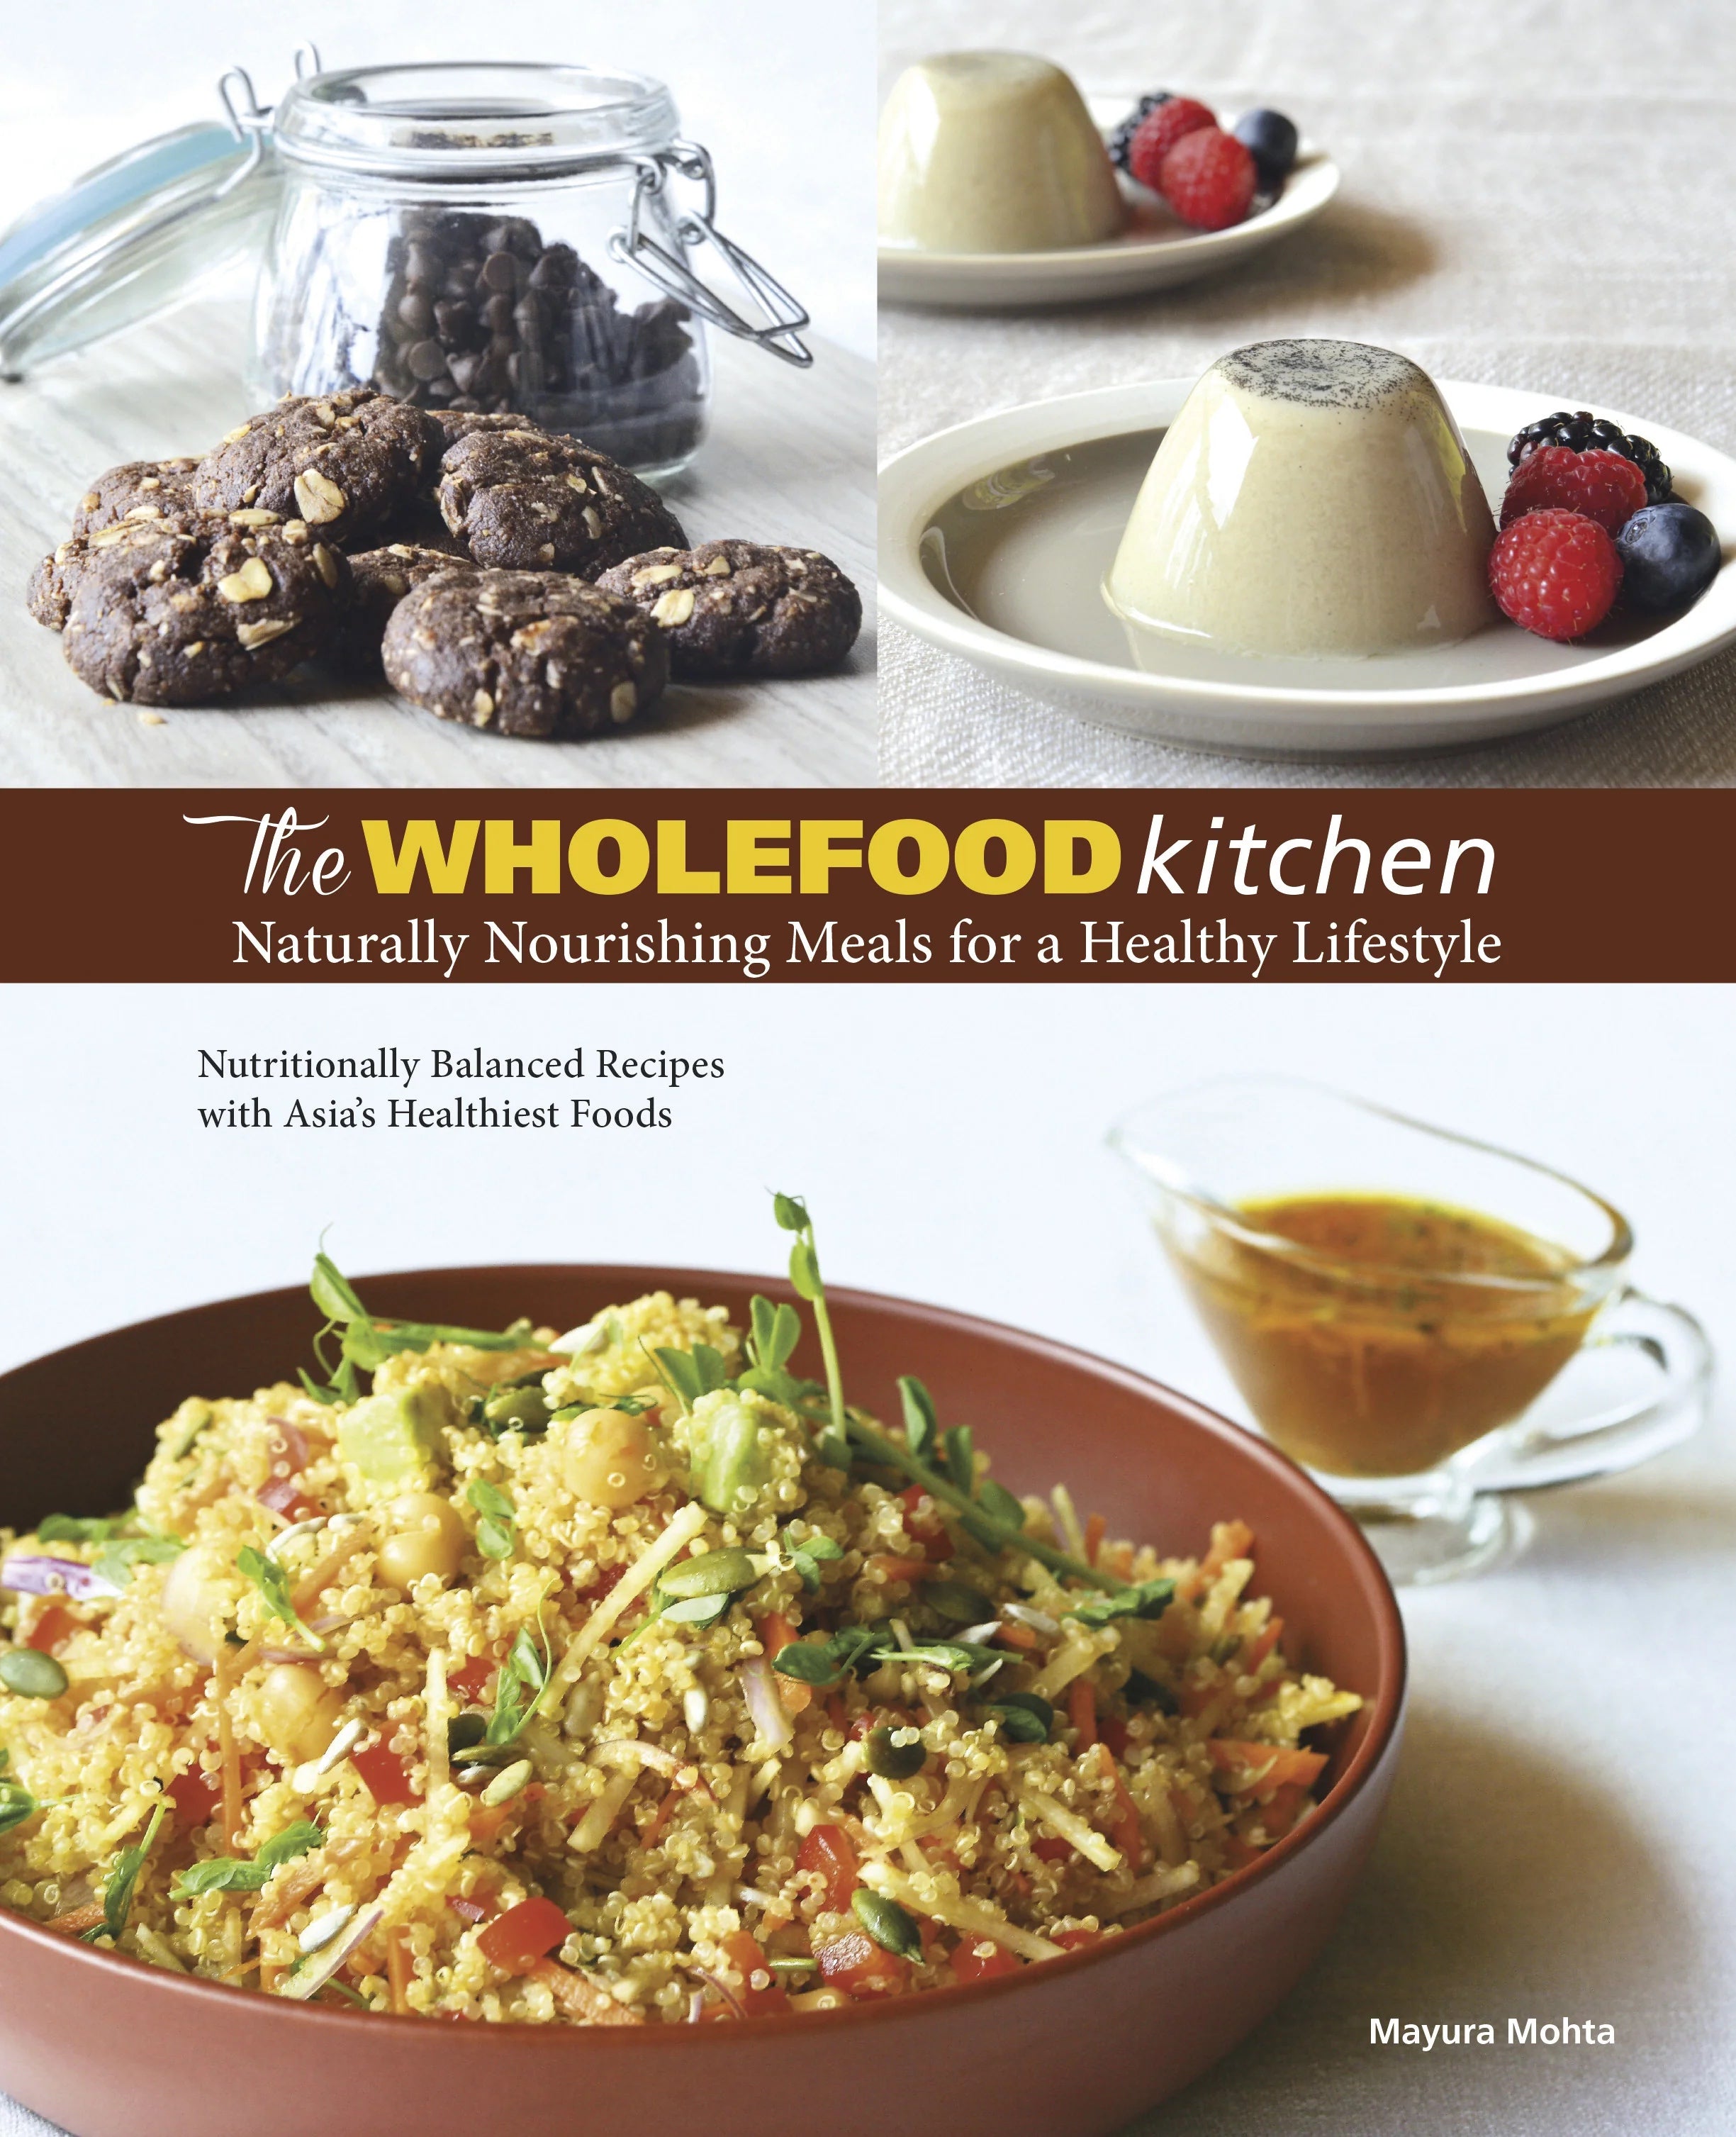 The Wholefood Kitchen: Naturally Nourishing Meals for a Healthy Lifestyle